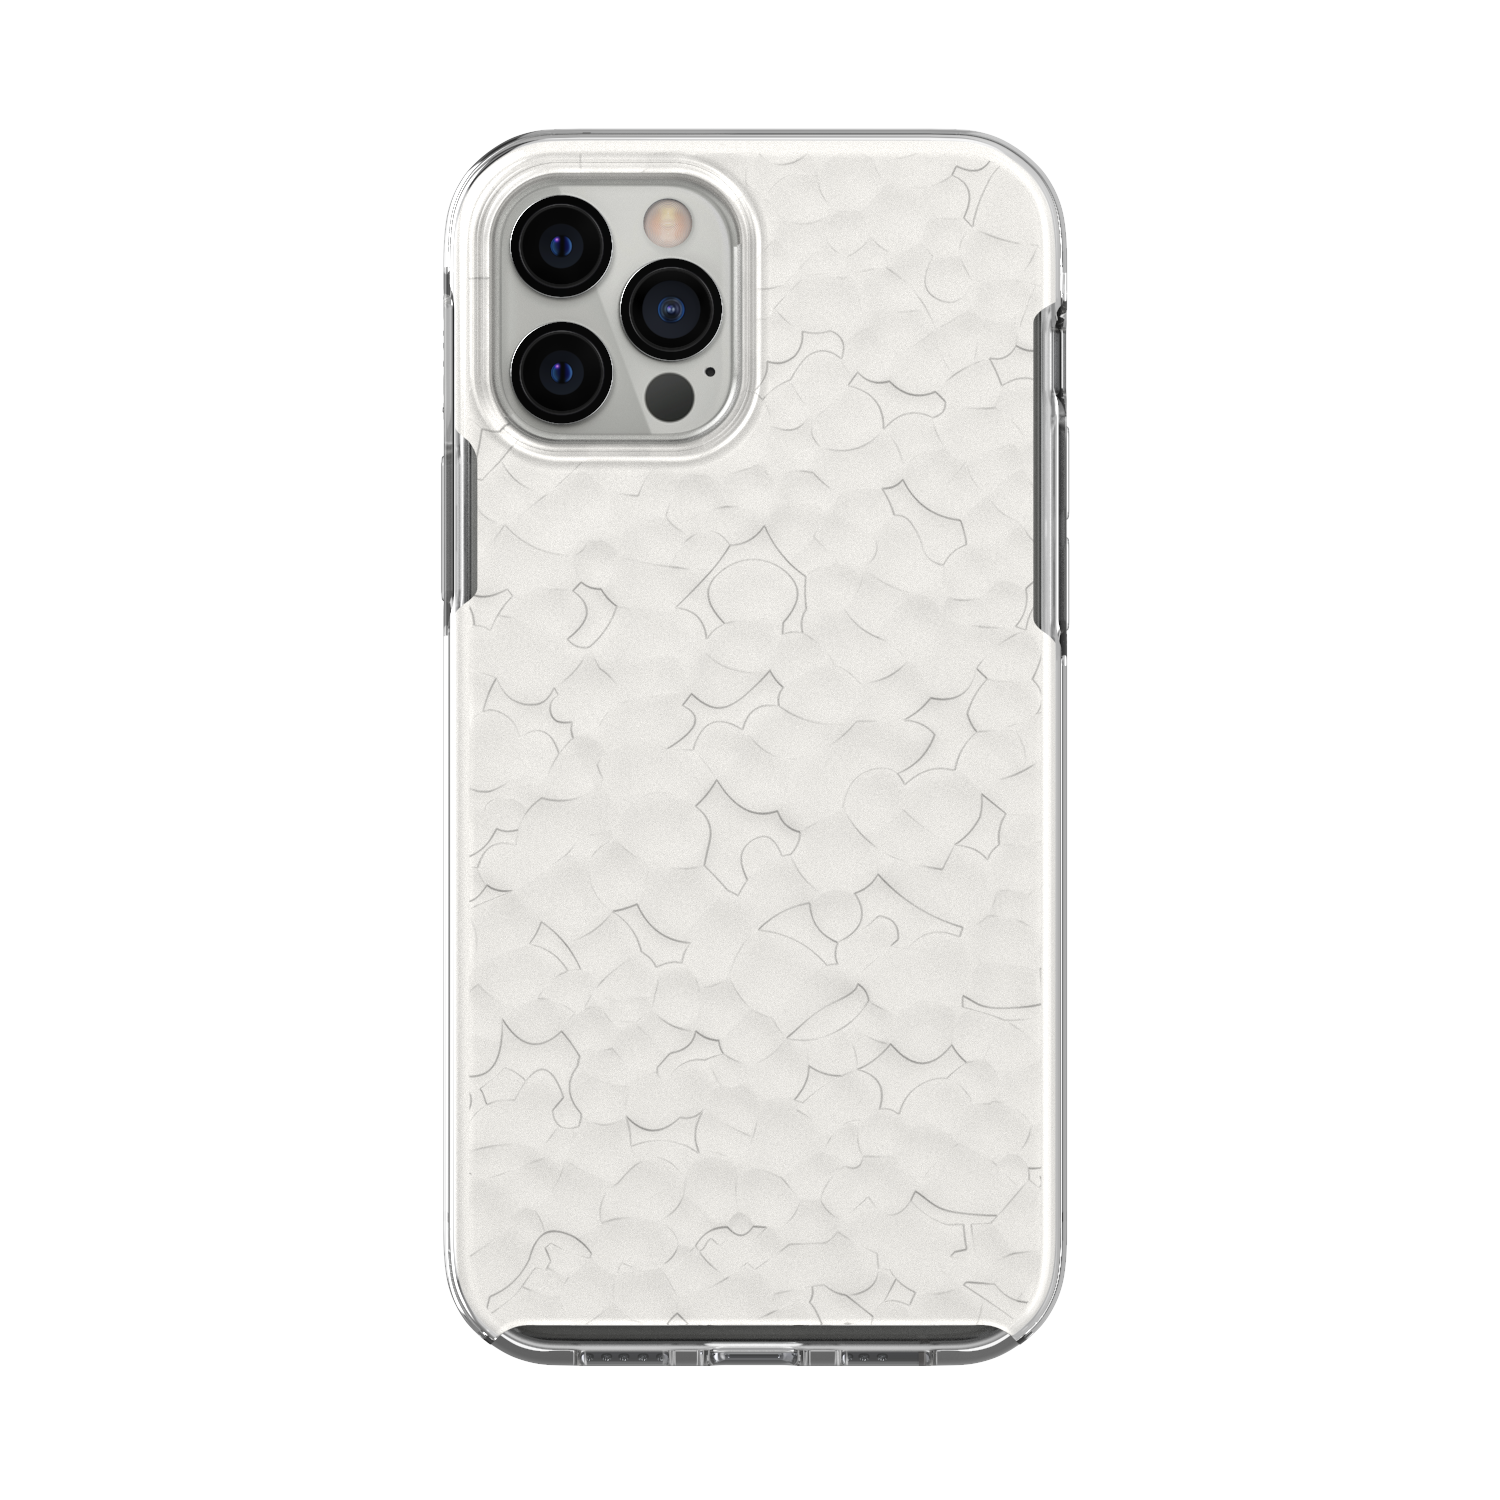 Sentri Vintage White for iPhone 12 and 12 Pro